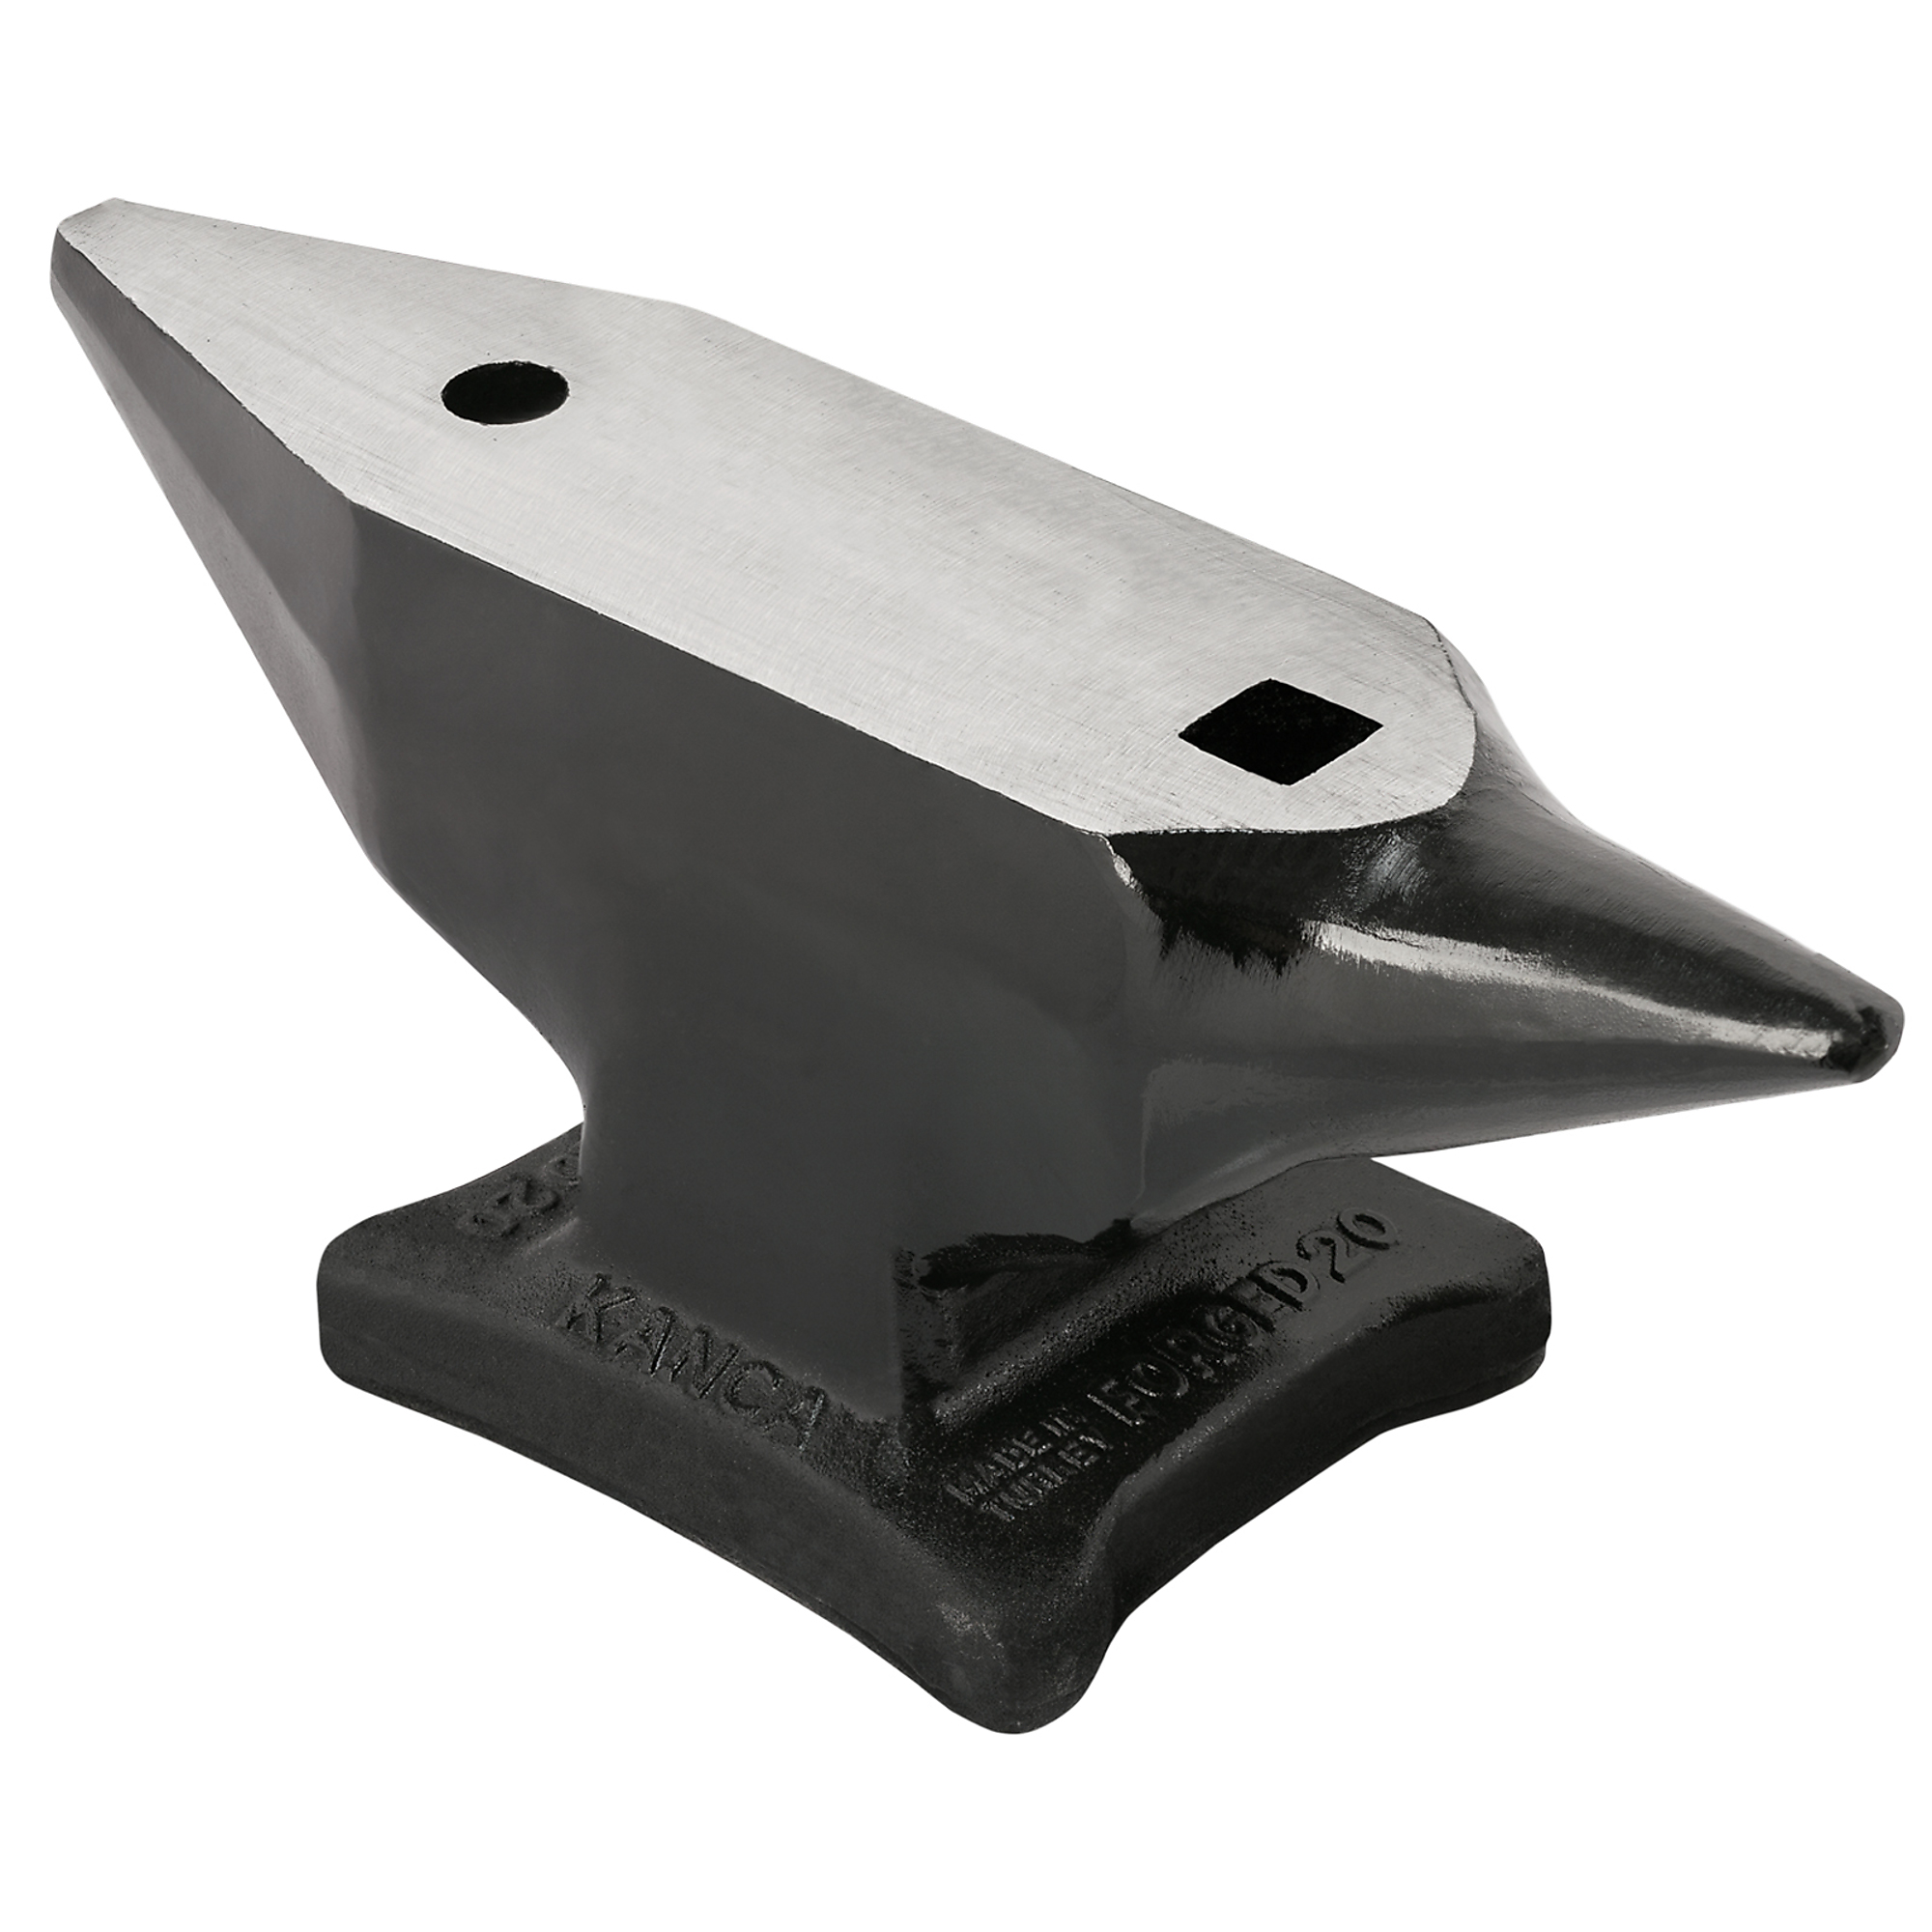 KANCA, DROP FORGED ANVIL 20 KG - 44 LBS, Face Length 15 in, Face Width 3 in, Horn Length 4 in, Model Drop Forged Anvil